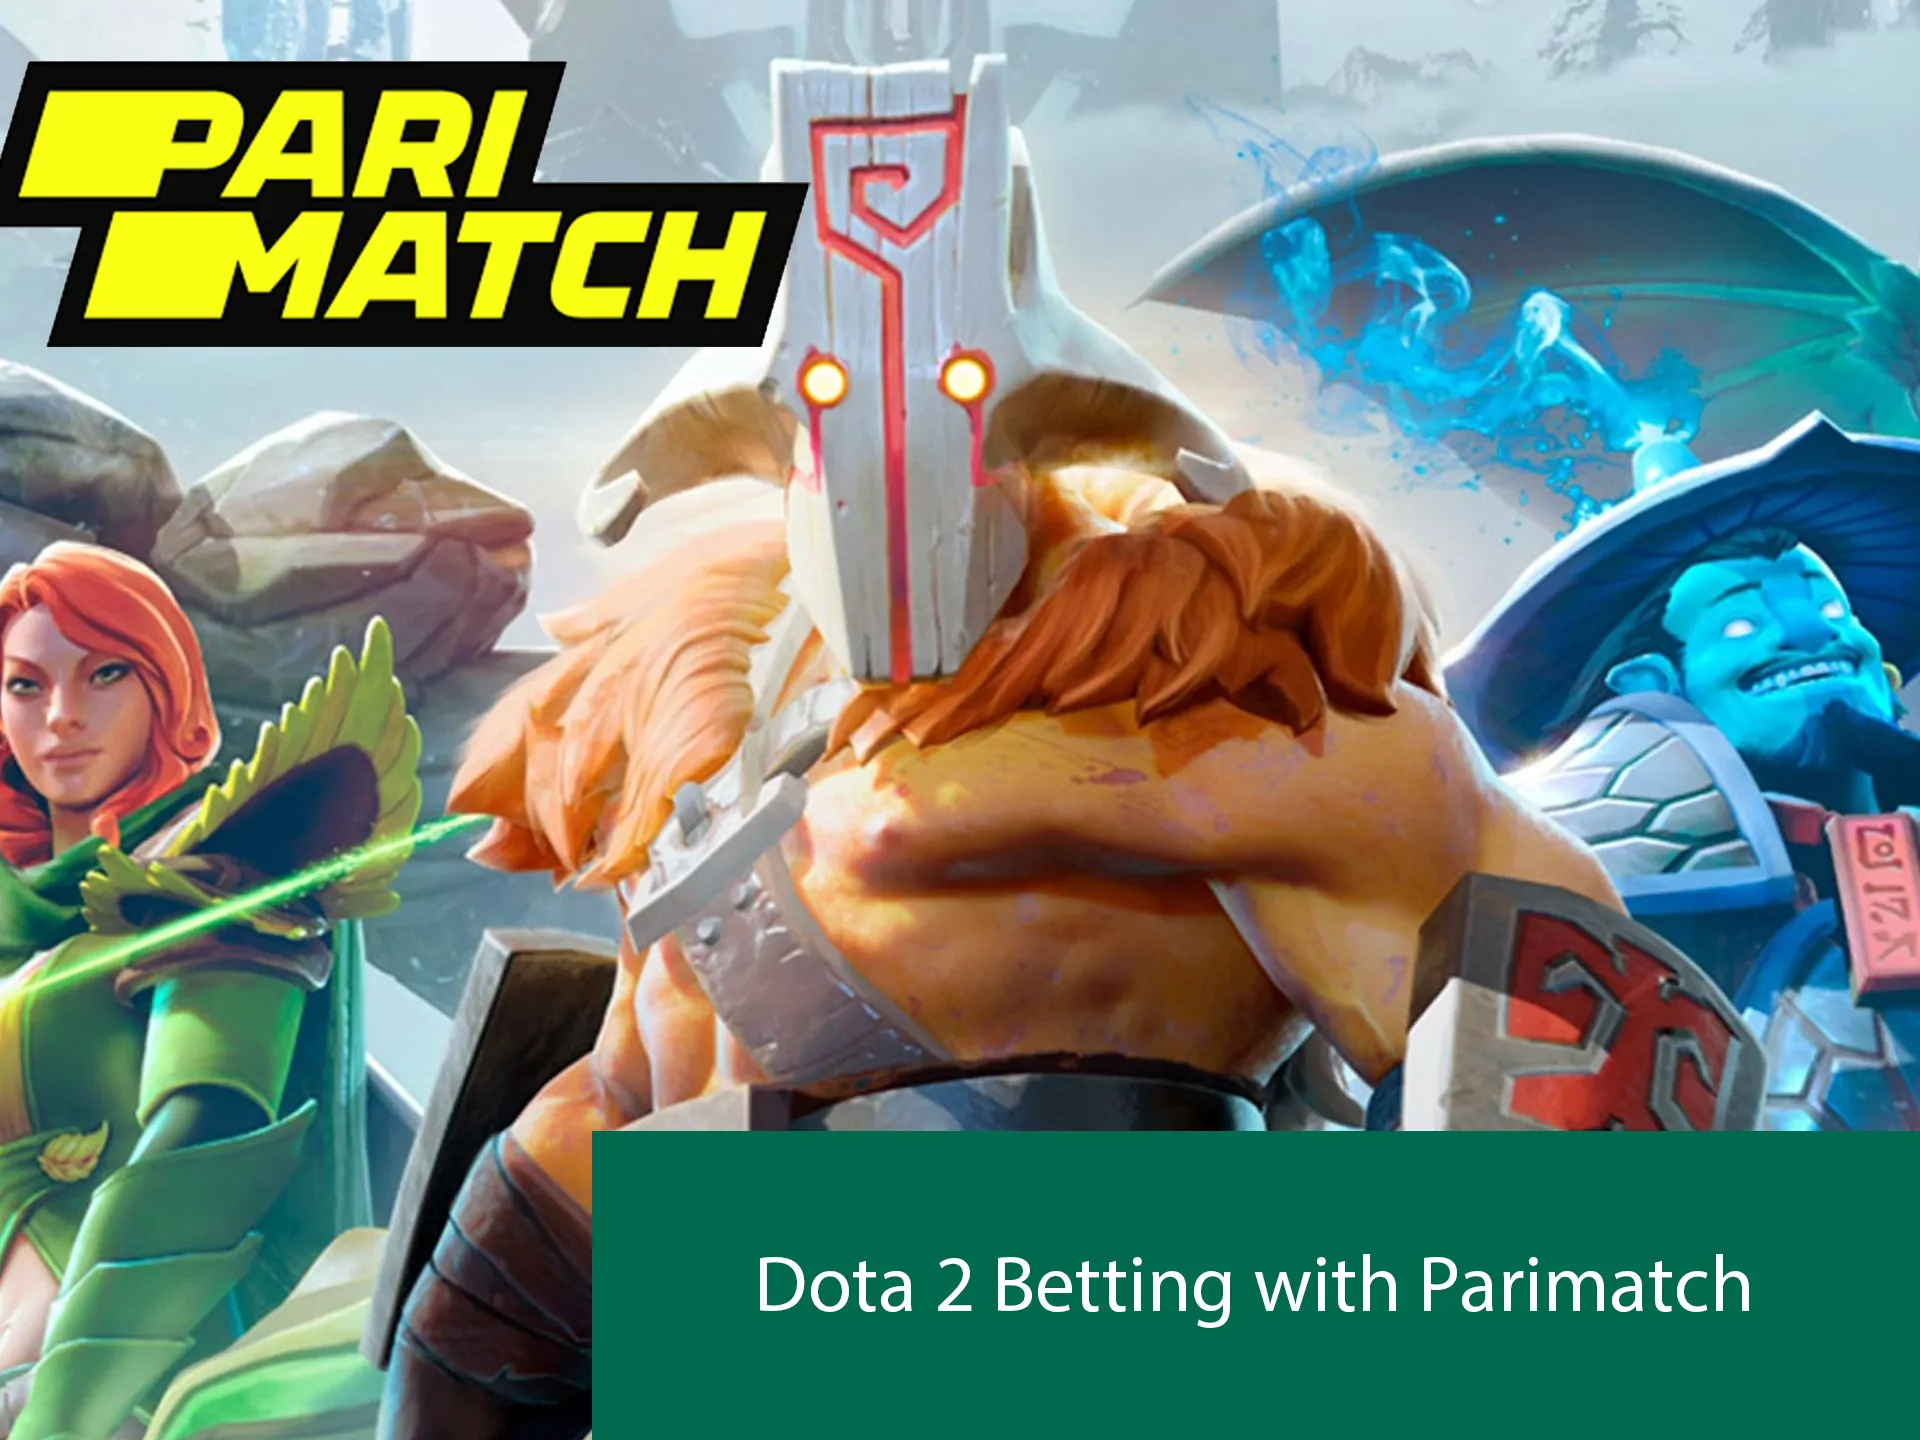 Parimatch is goodway for betting Dota 2.